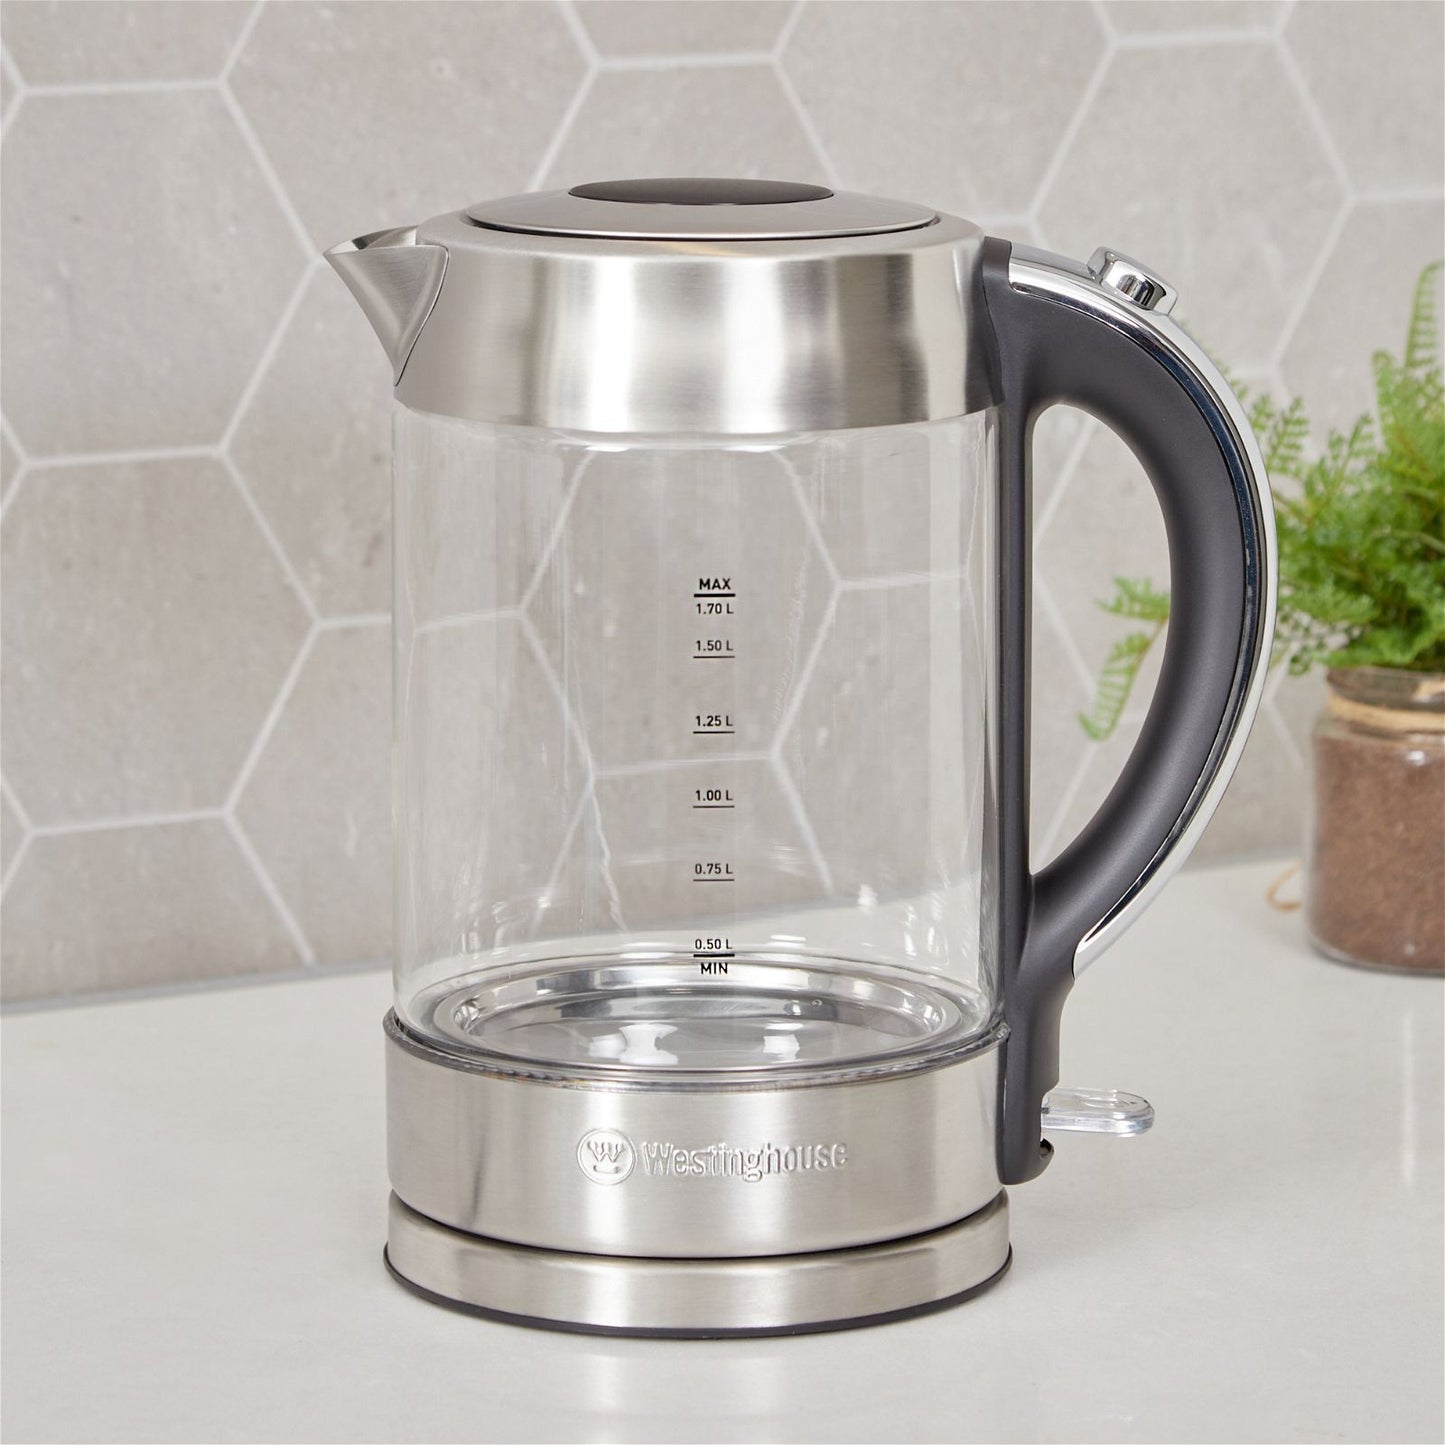 Westinghouse Kettle 1.7L Glass-#product_category#- Distributed by: RVM under license